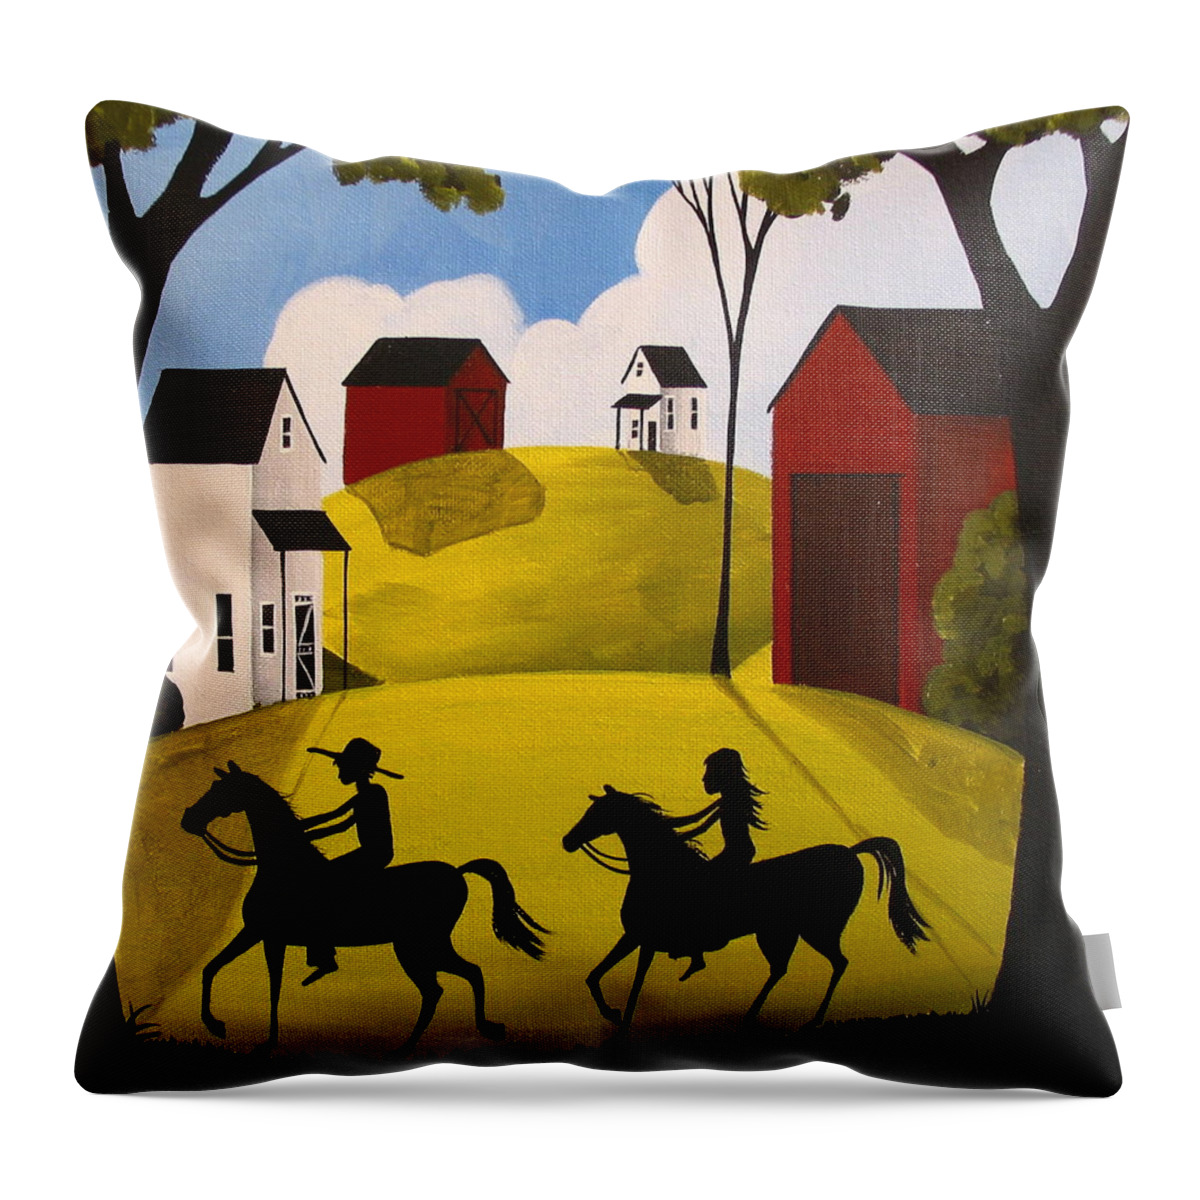 Art Throw Pillow featuring the painting Through The Woods by Debbie Criswell